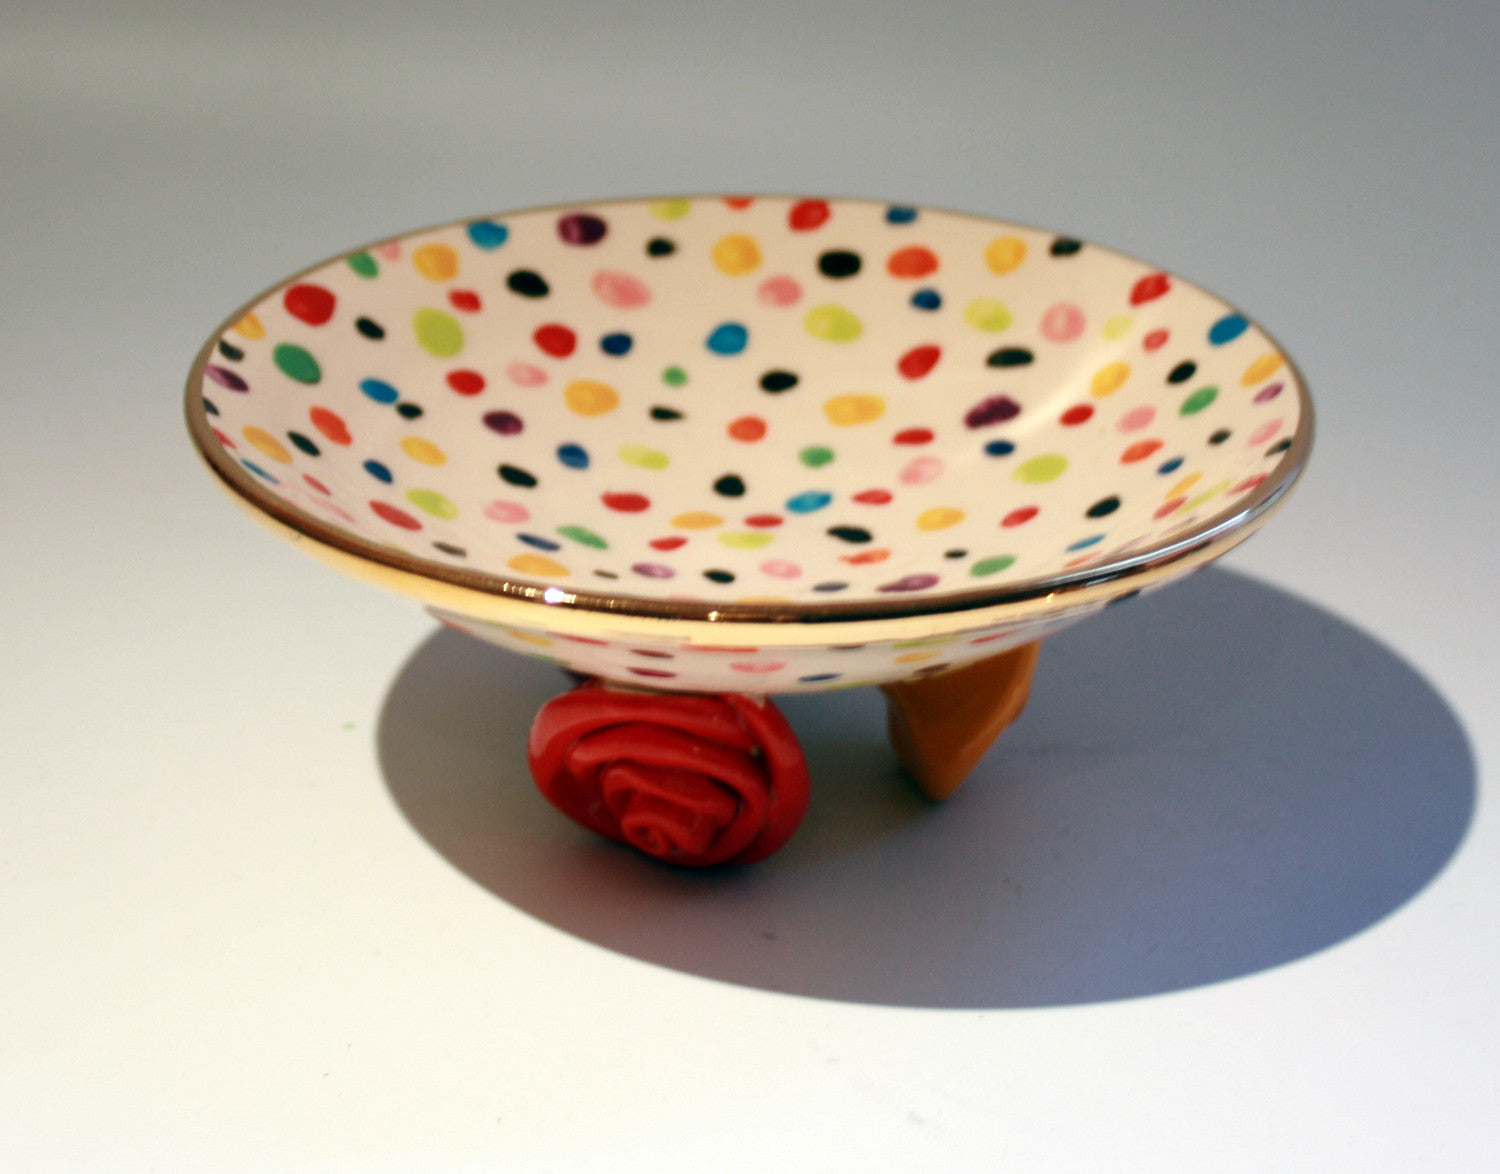 Rose Footed Dish Confetti - MaryRoseYoung